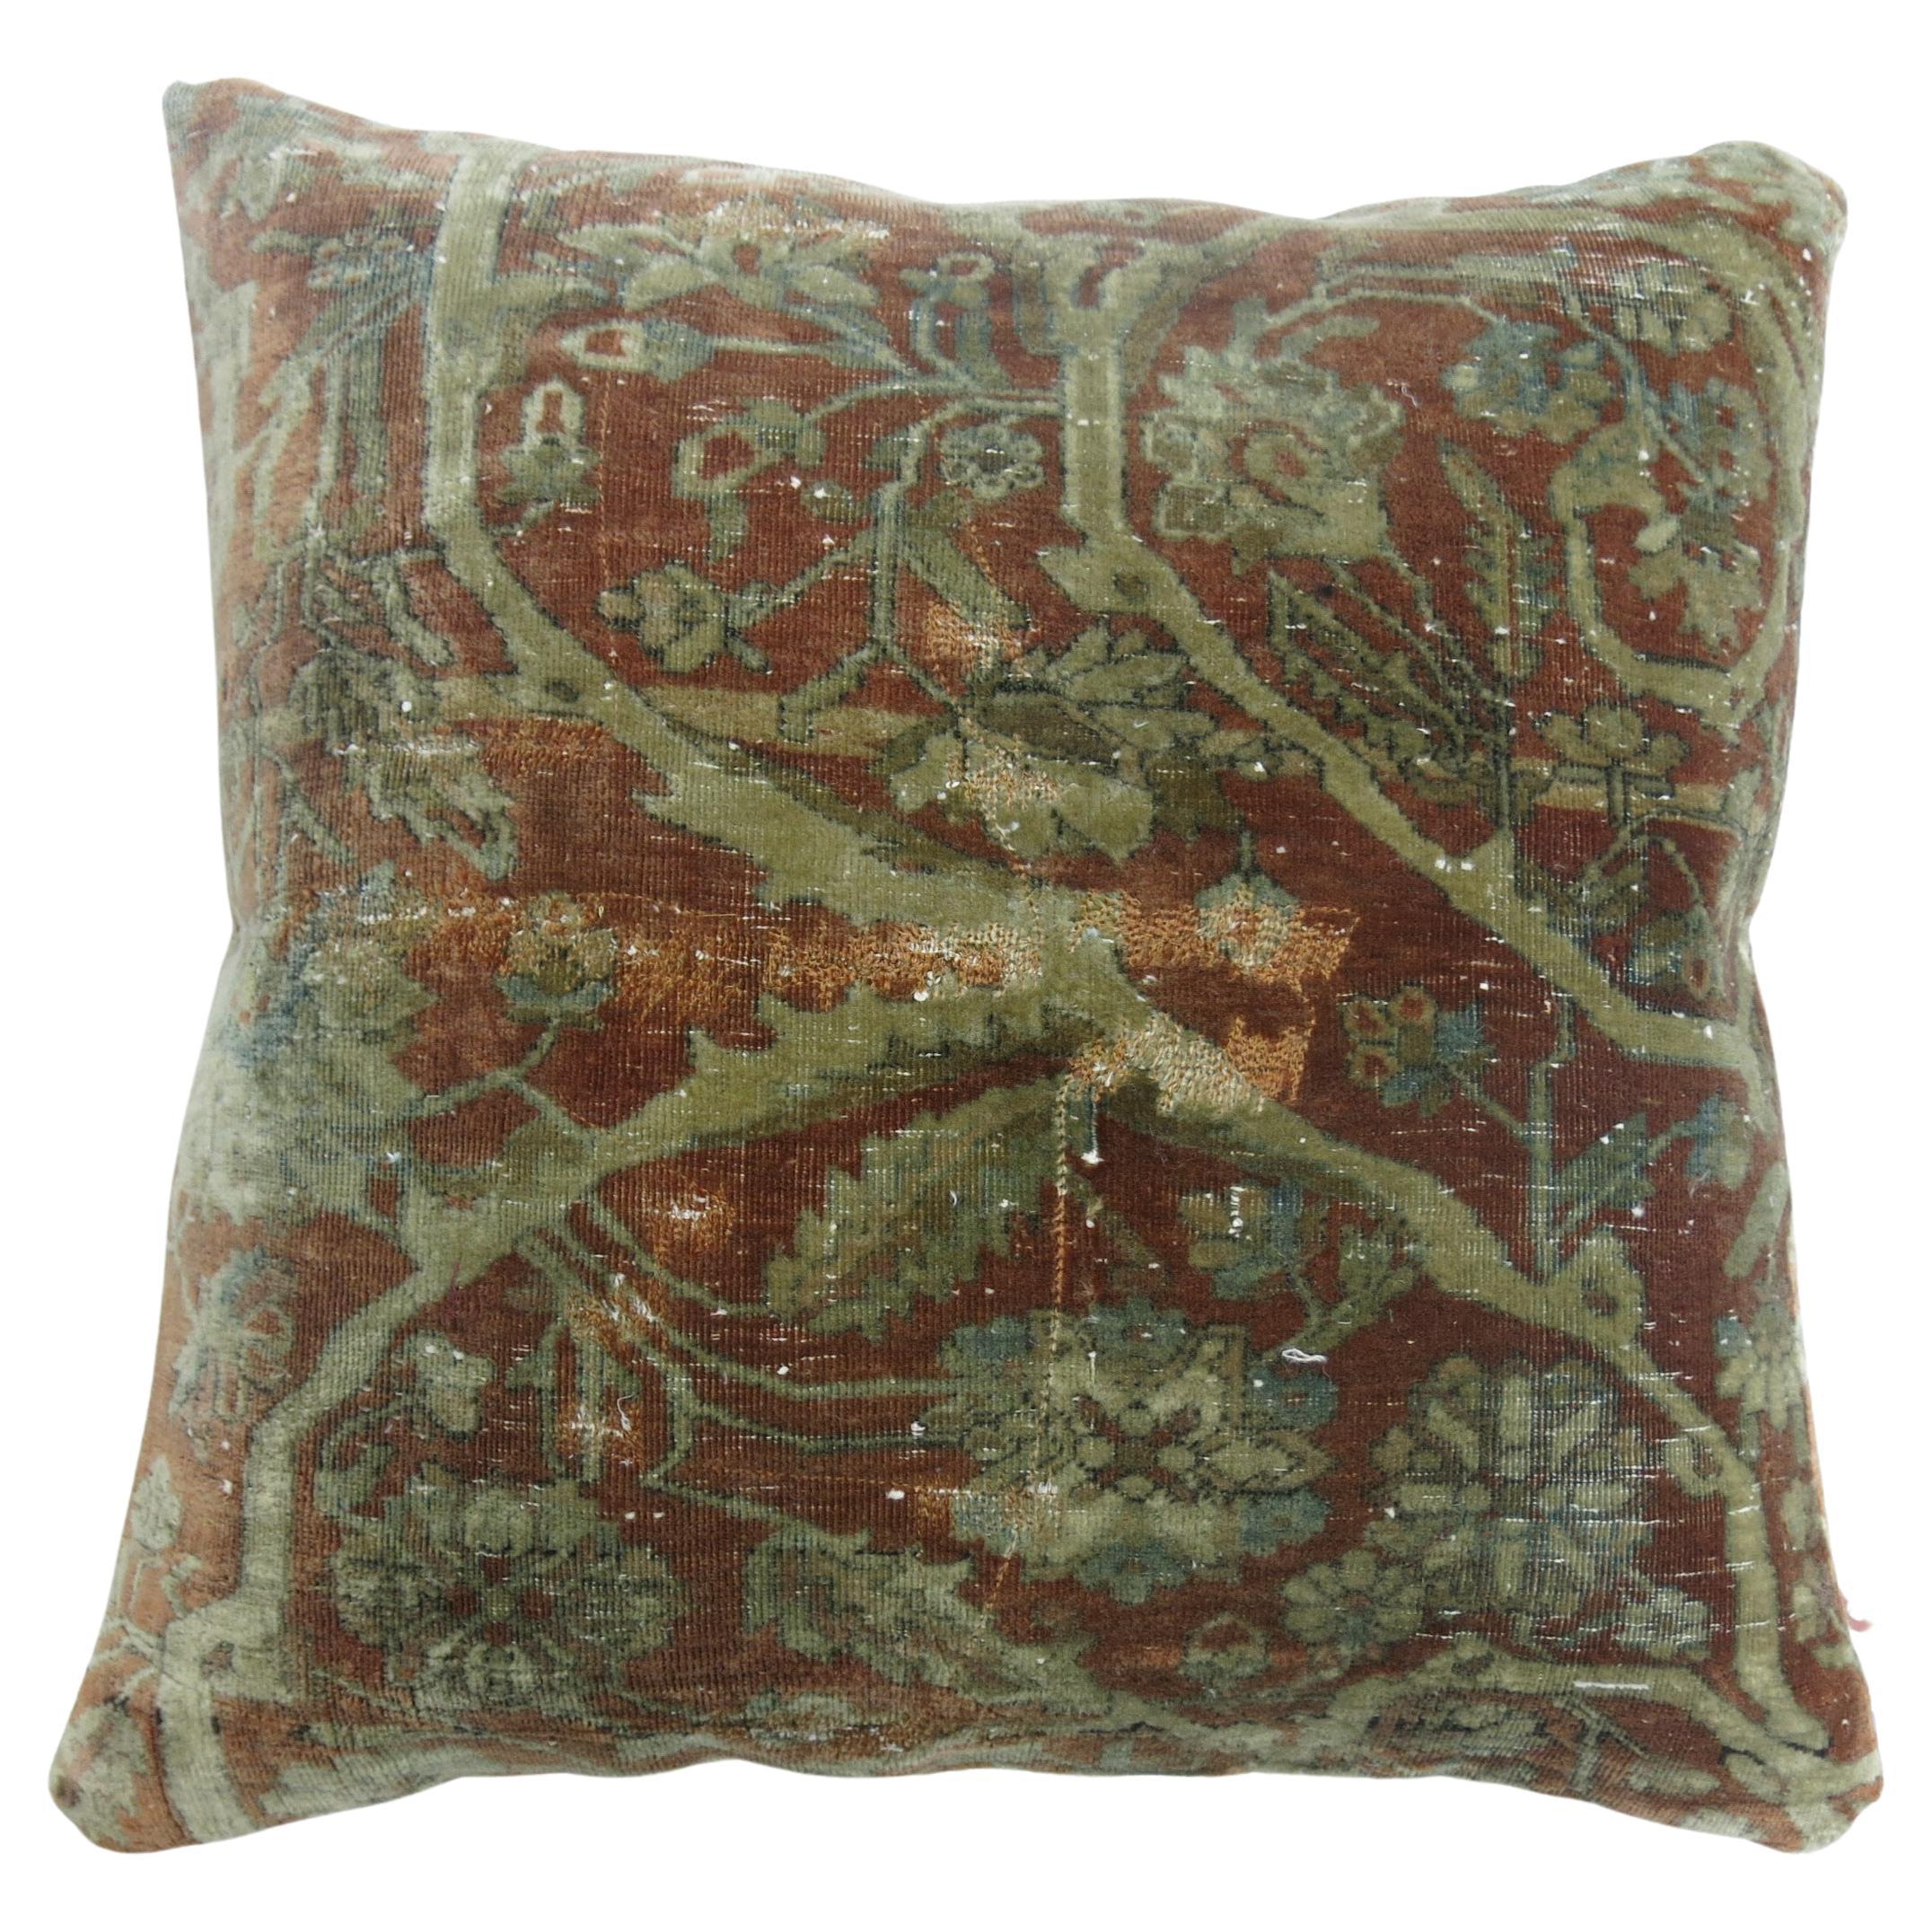 Pillow made from a Mohtasham Kashan rug.

Measures: 20'' x 20''.